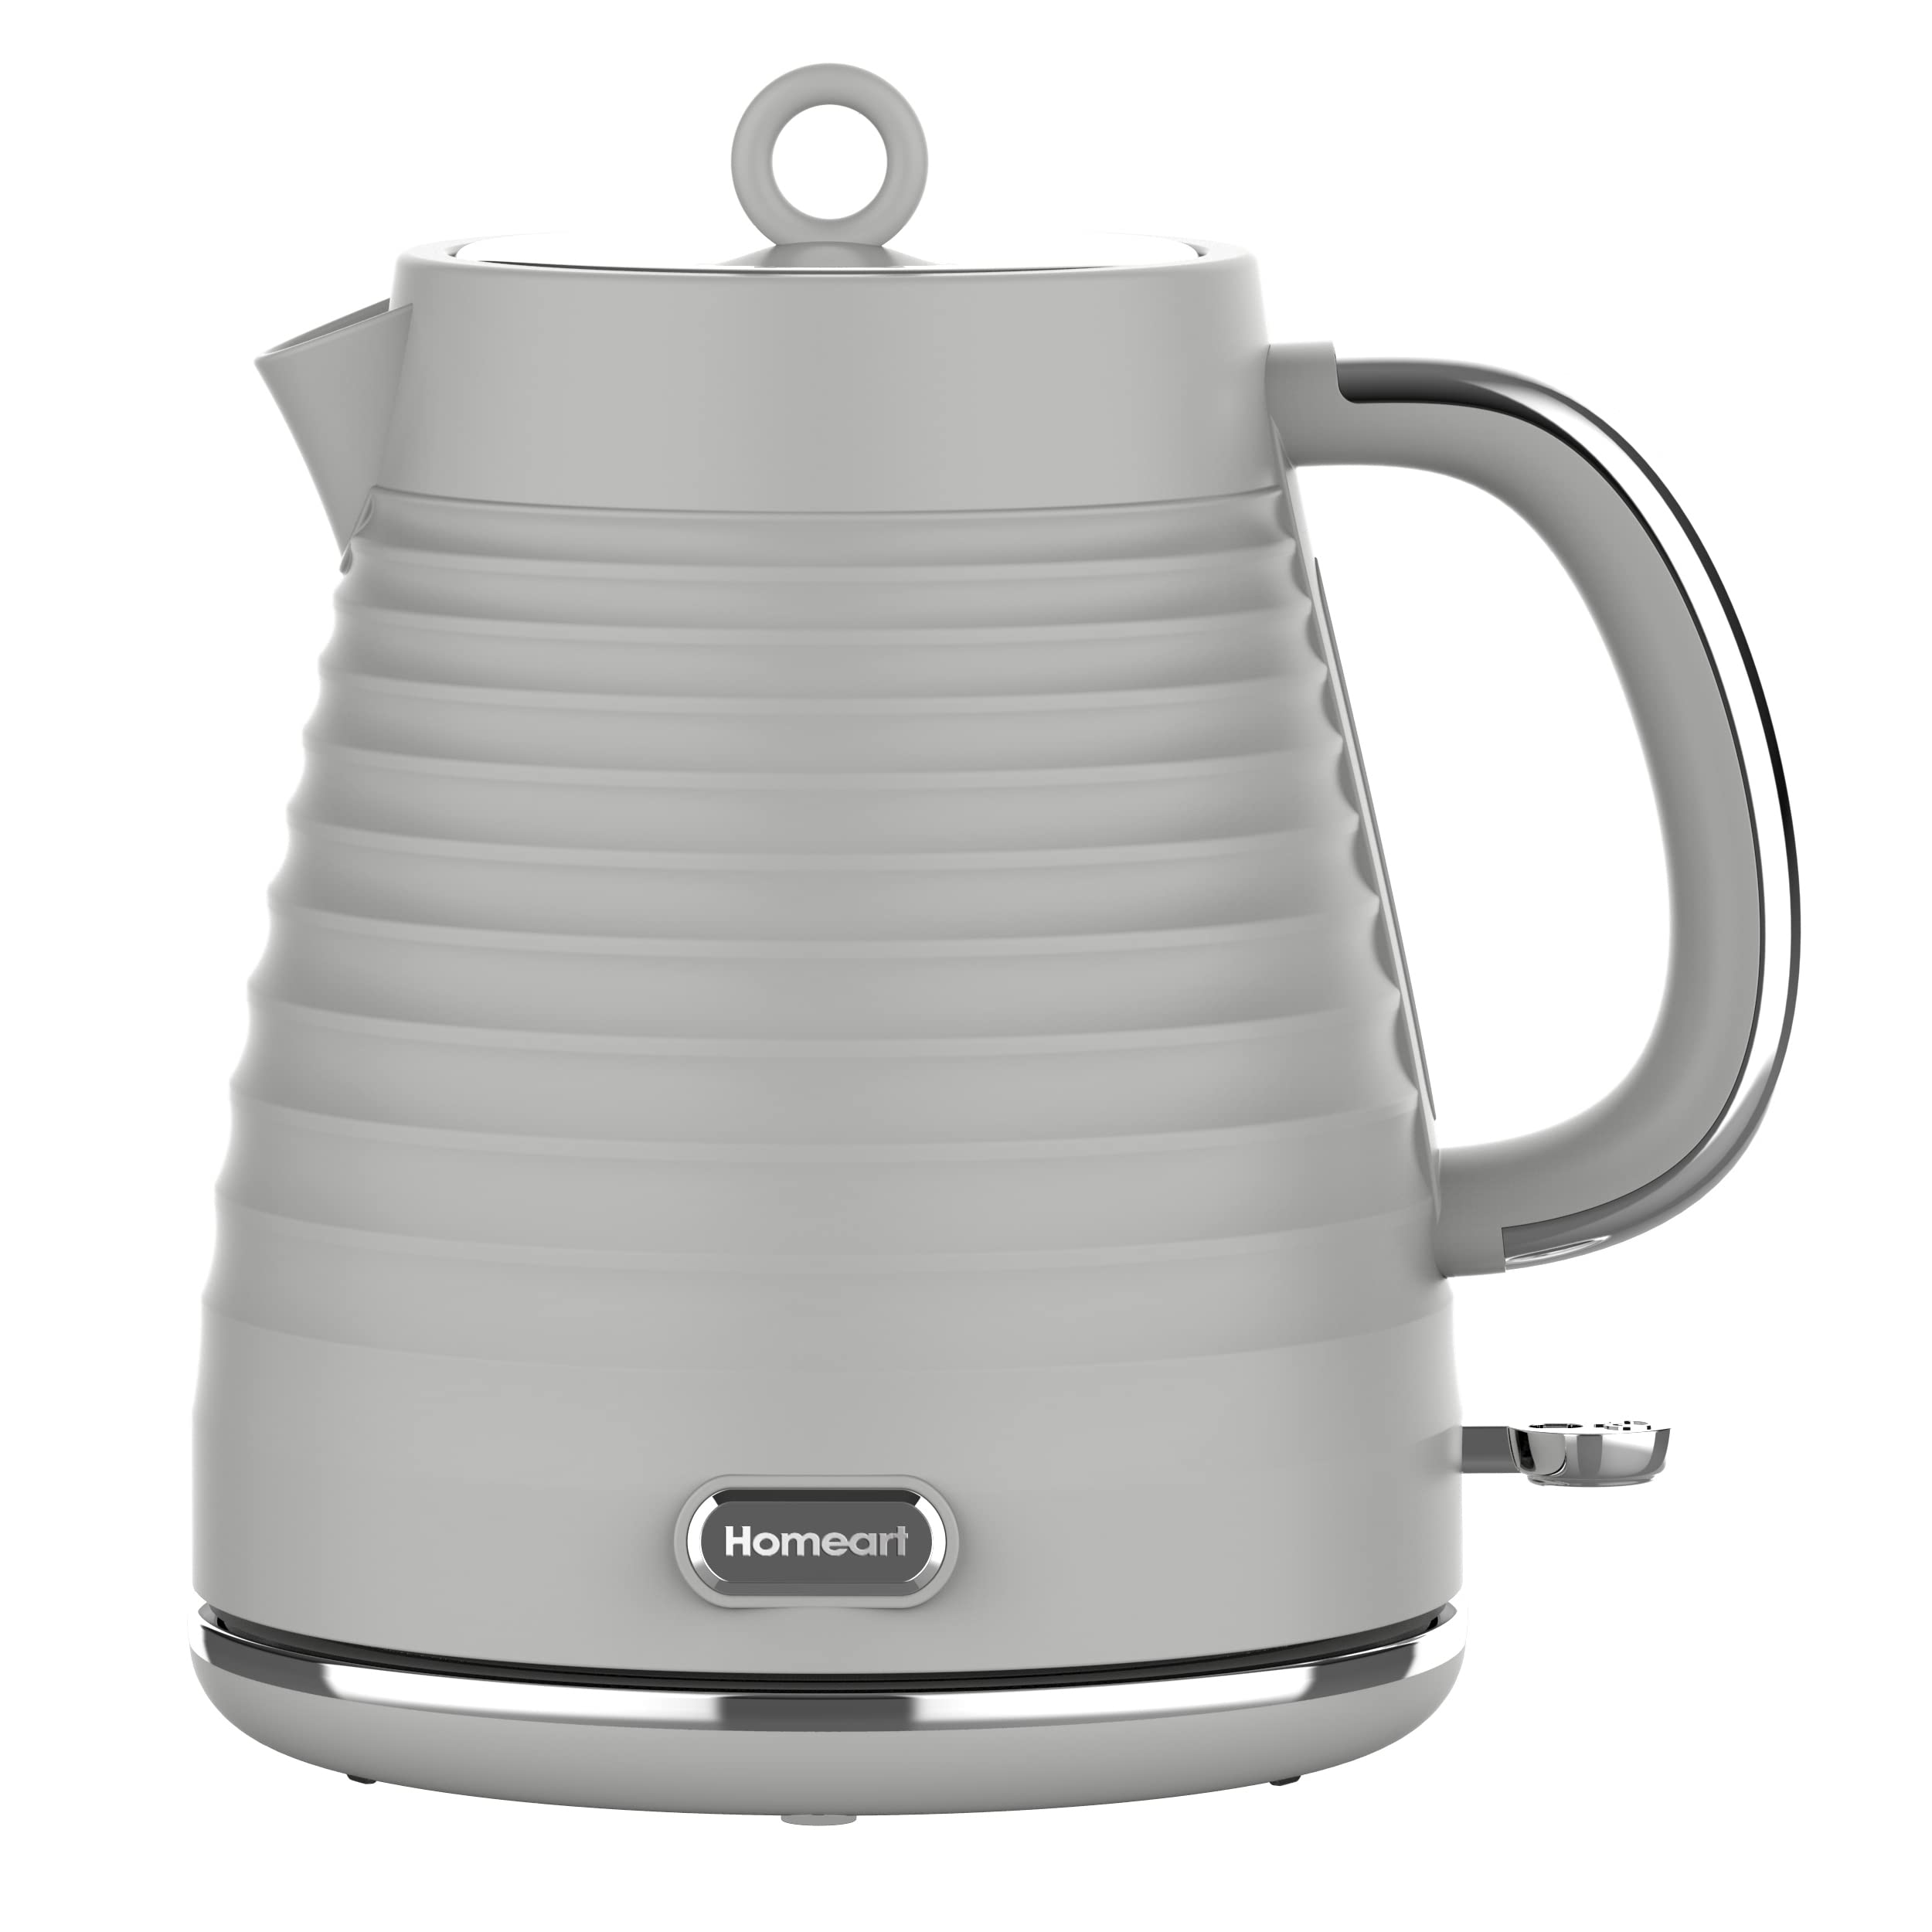 Homeart Riva Electric Kettle - With Removable Limescale Filter, Fast Boiling and Auto Shut-off, Ergonomic Handle and 360-Degree Base - 1.7L Capacity, Powder Gray